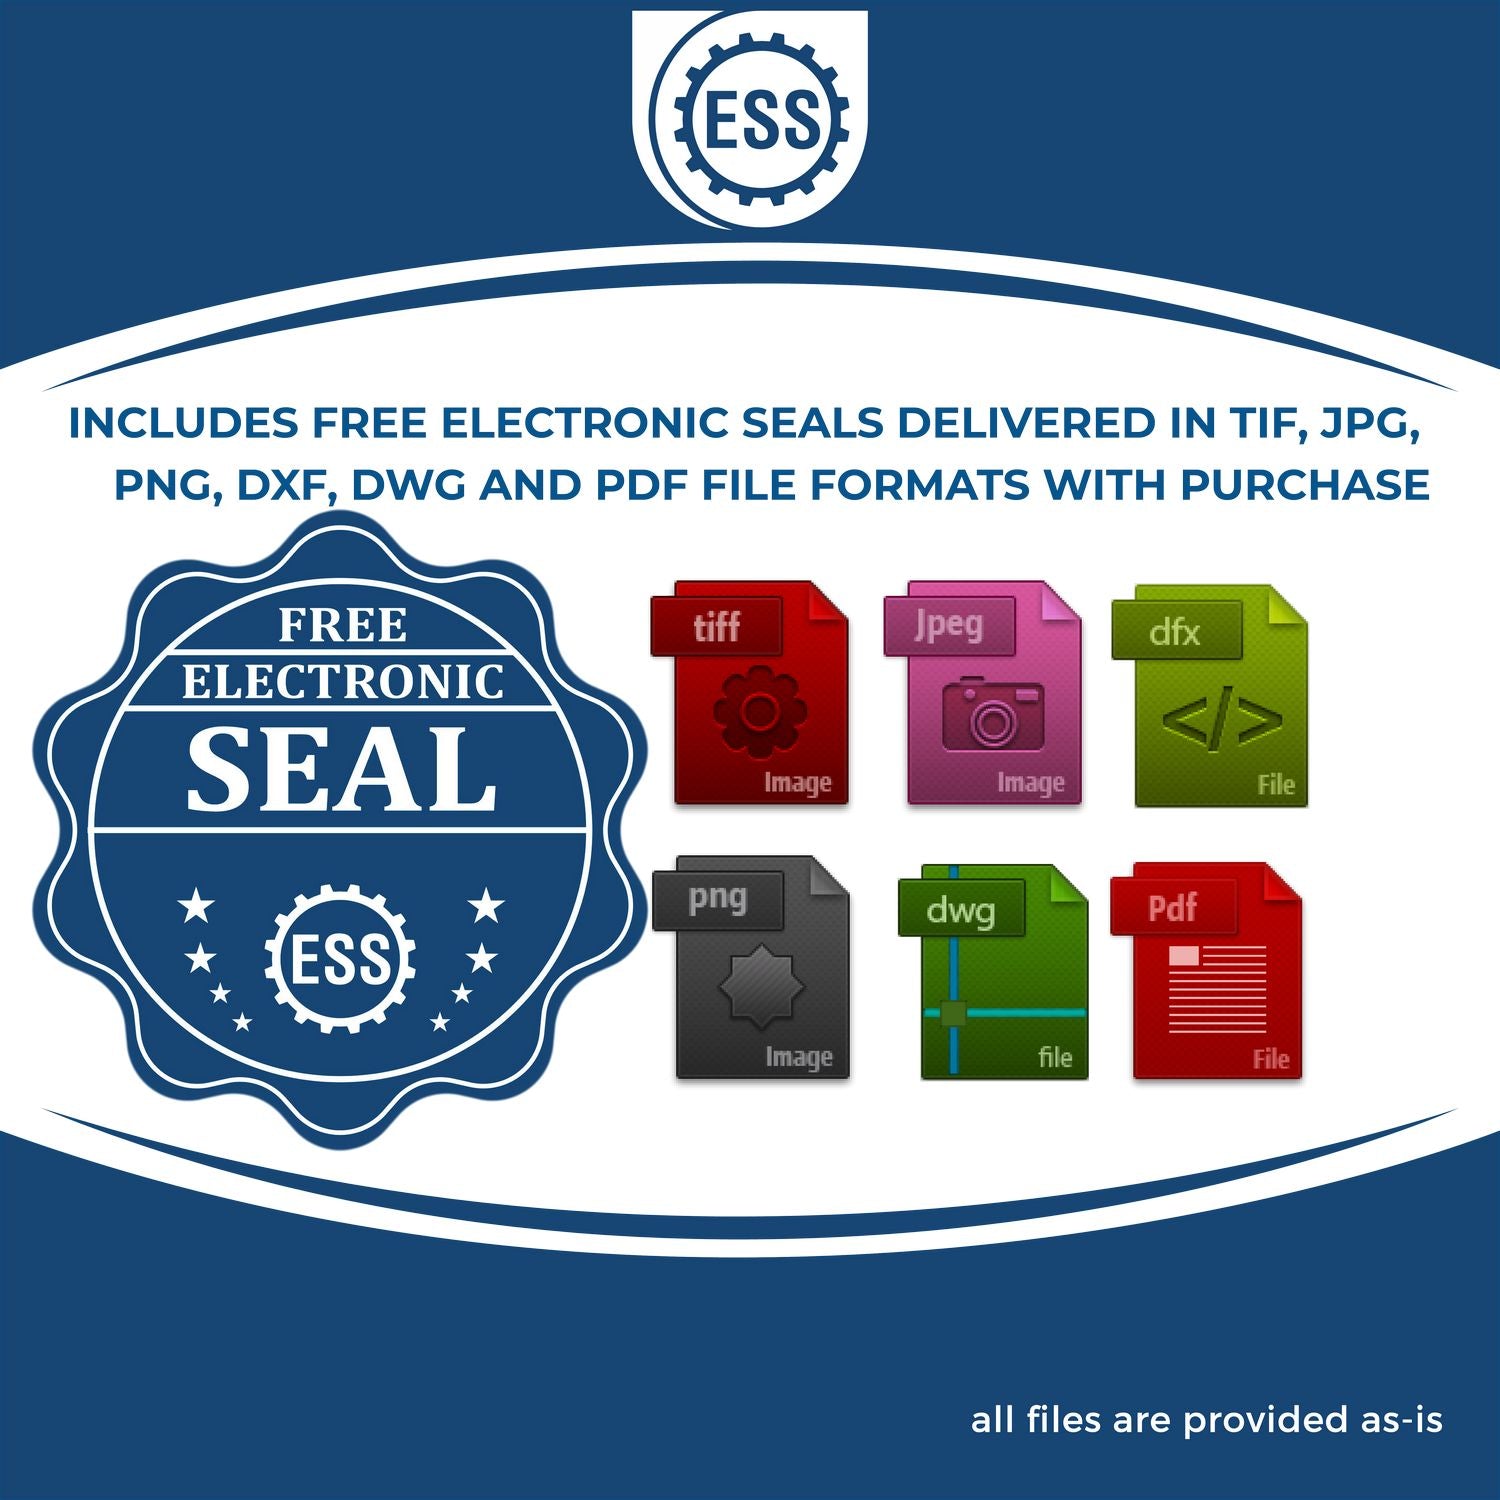 An infographic for the free electronic seal for the New York Desk Surveyor Seal Embosser illustrating the different file type icons such as DXF, DWG, TIF, JPG and PNG.